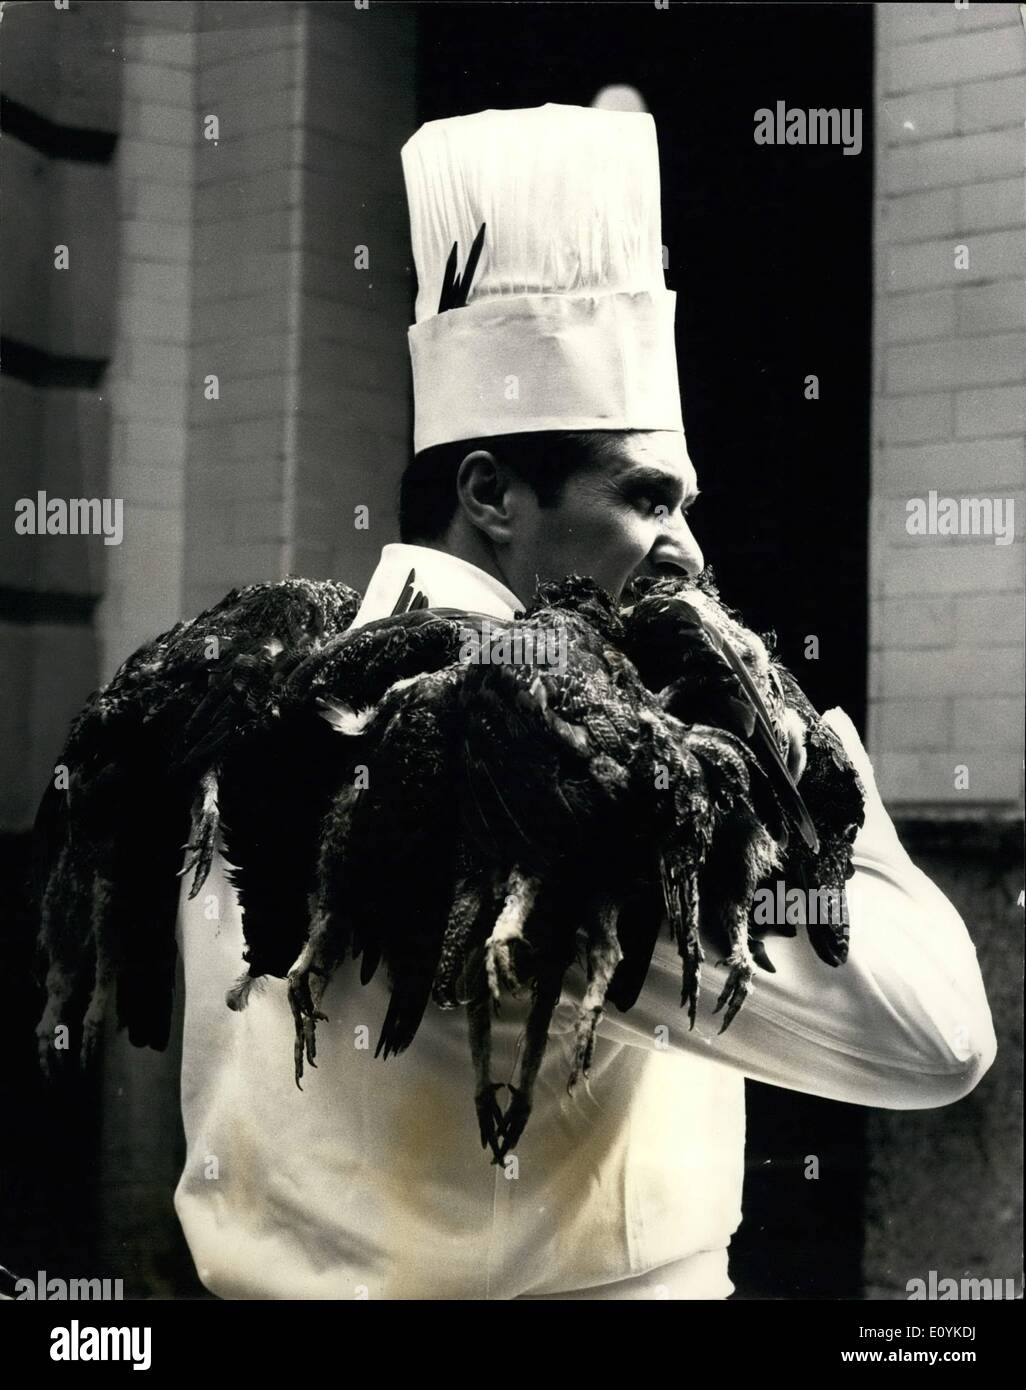 Aug. 08, 1970 - The glorious twelfth. Grouse at the Savoy. Photo shows Vladimir Piccoli, the Grill Chef at the Savoy Hotel carries in grouse today the Glorious Telfth opening of the grouse season. Stock Photo